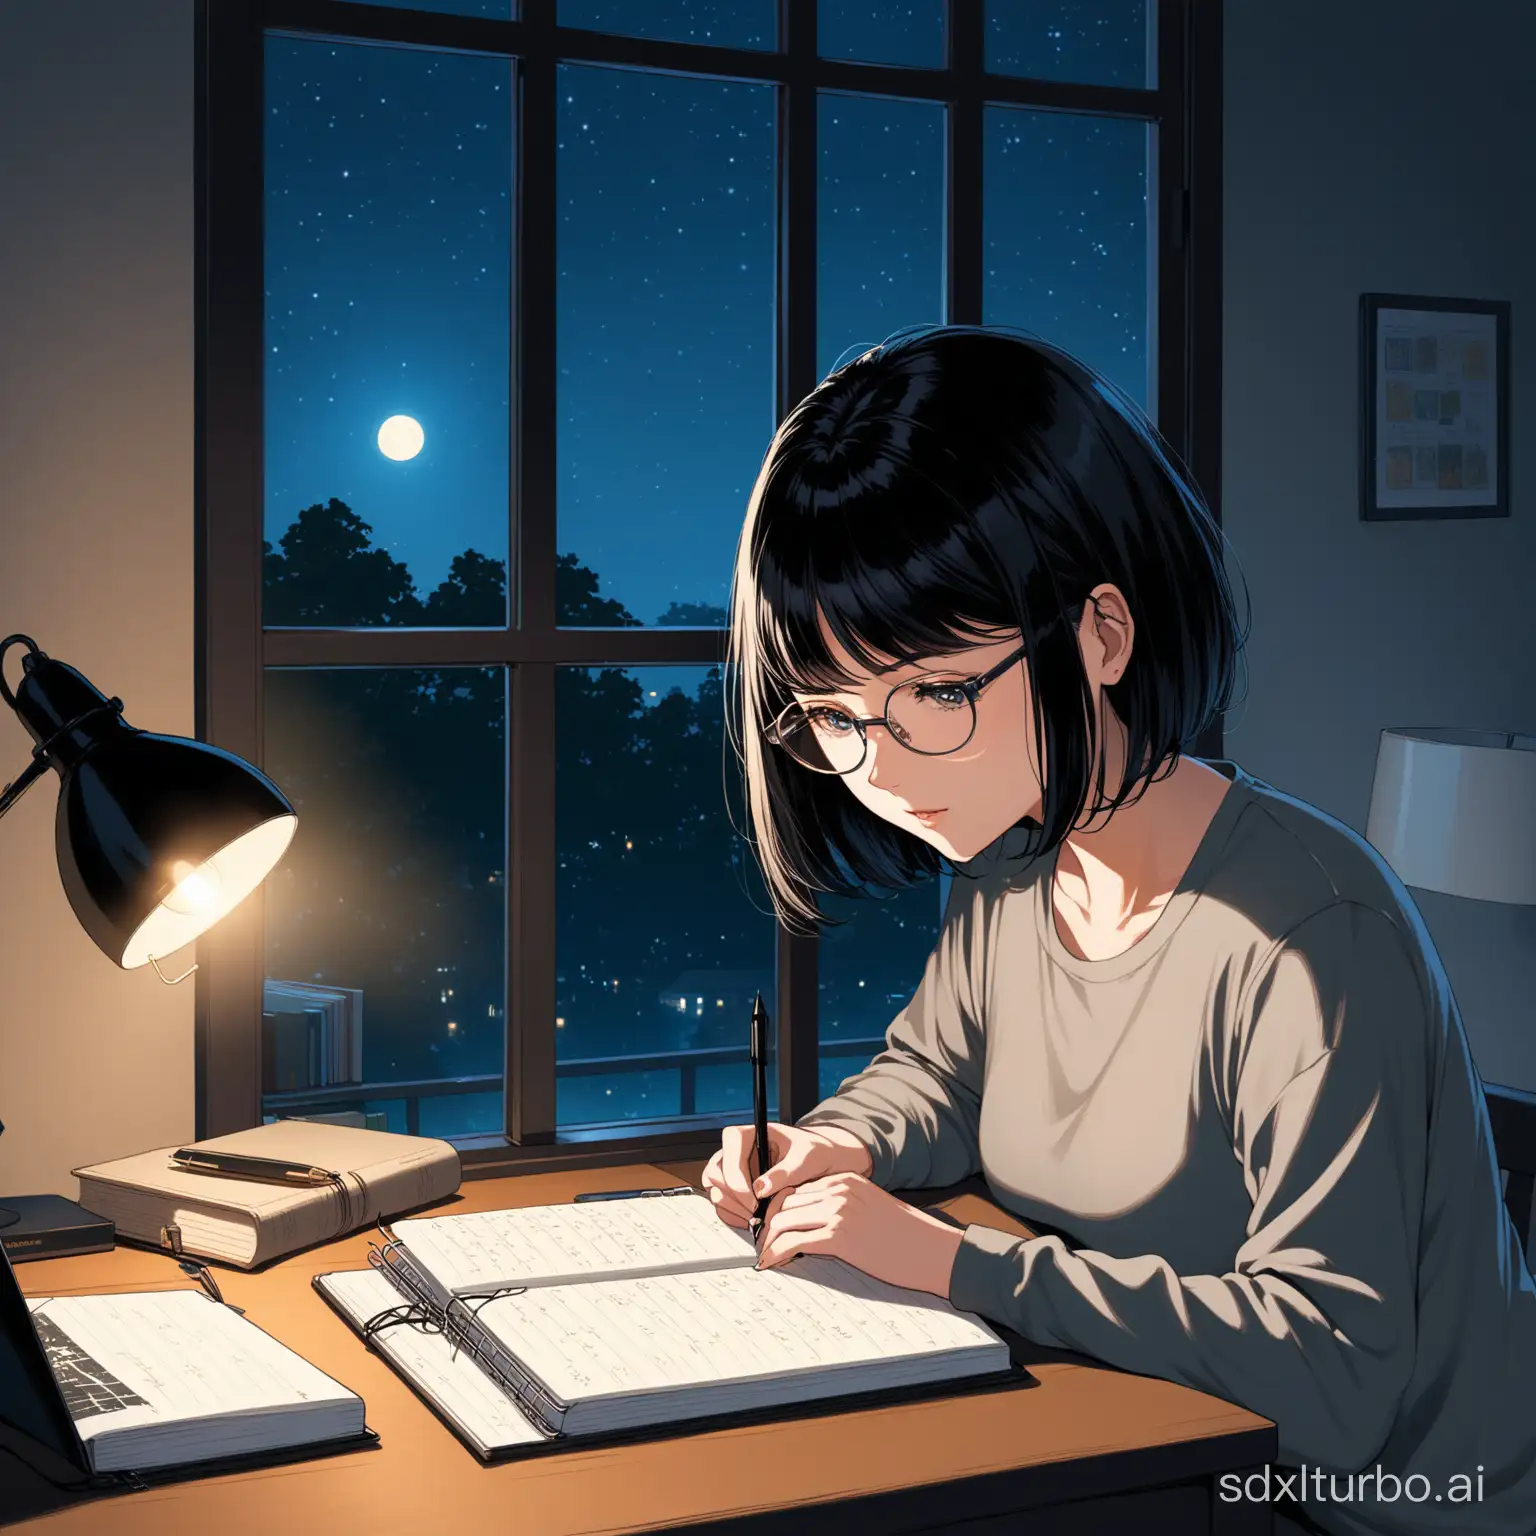 Nighttime-Writing-Woman-with-Black-Bob-Hair-and-Glasses